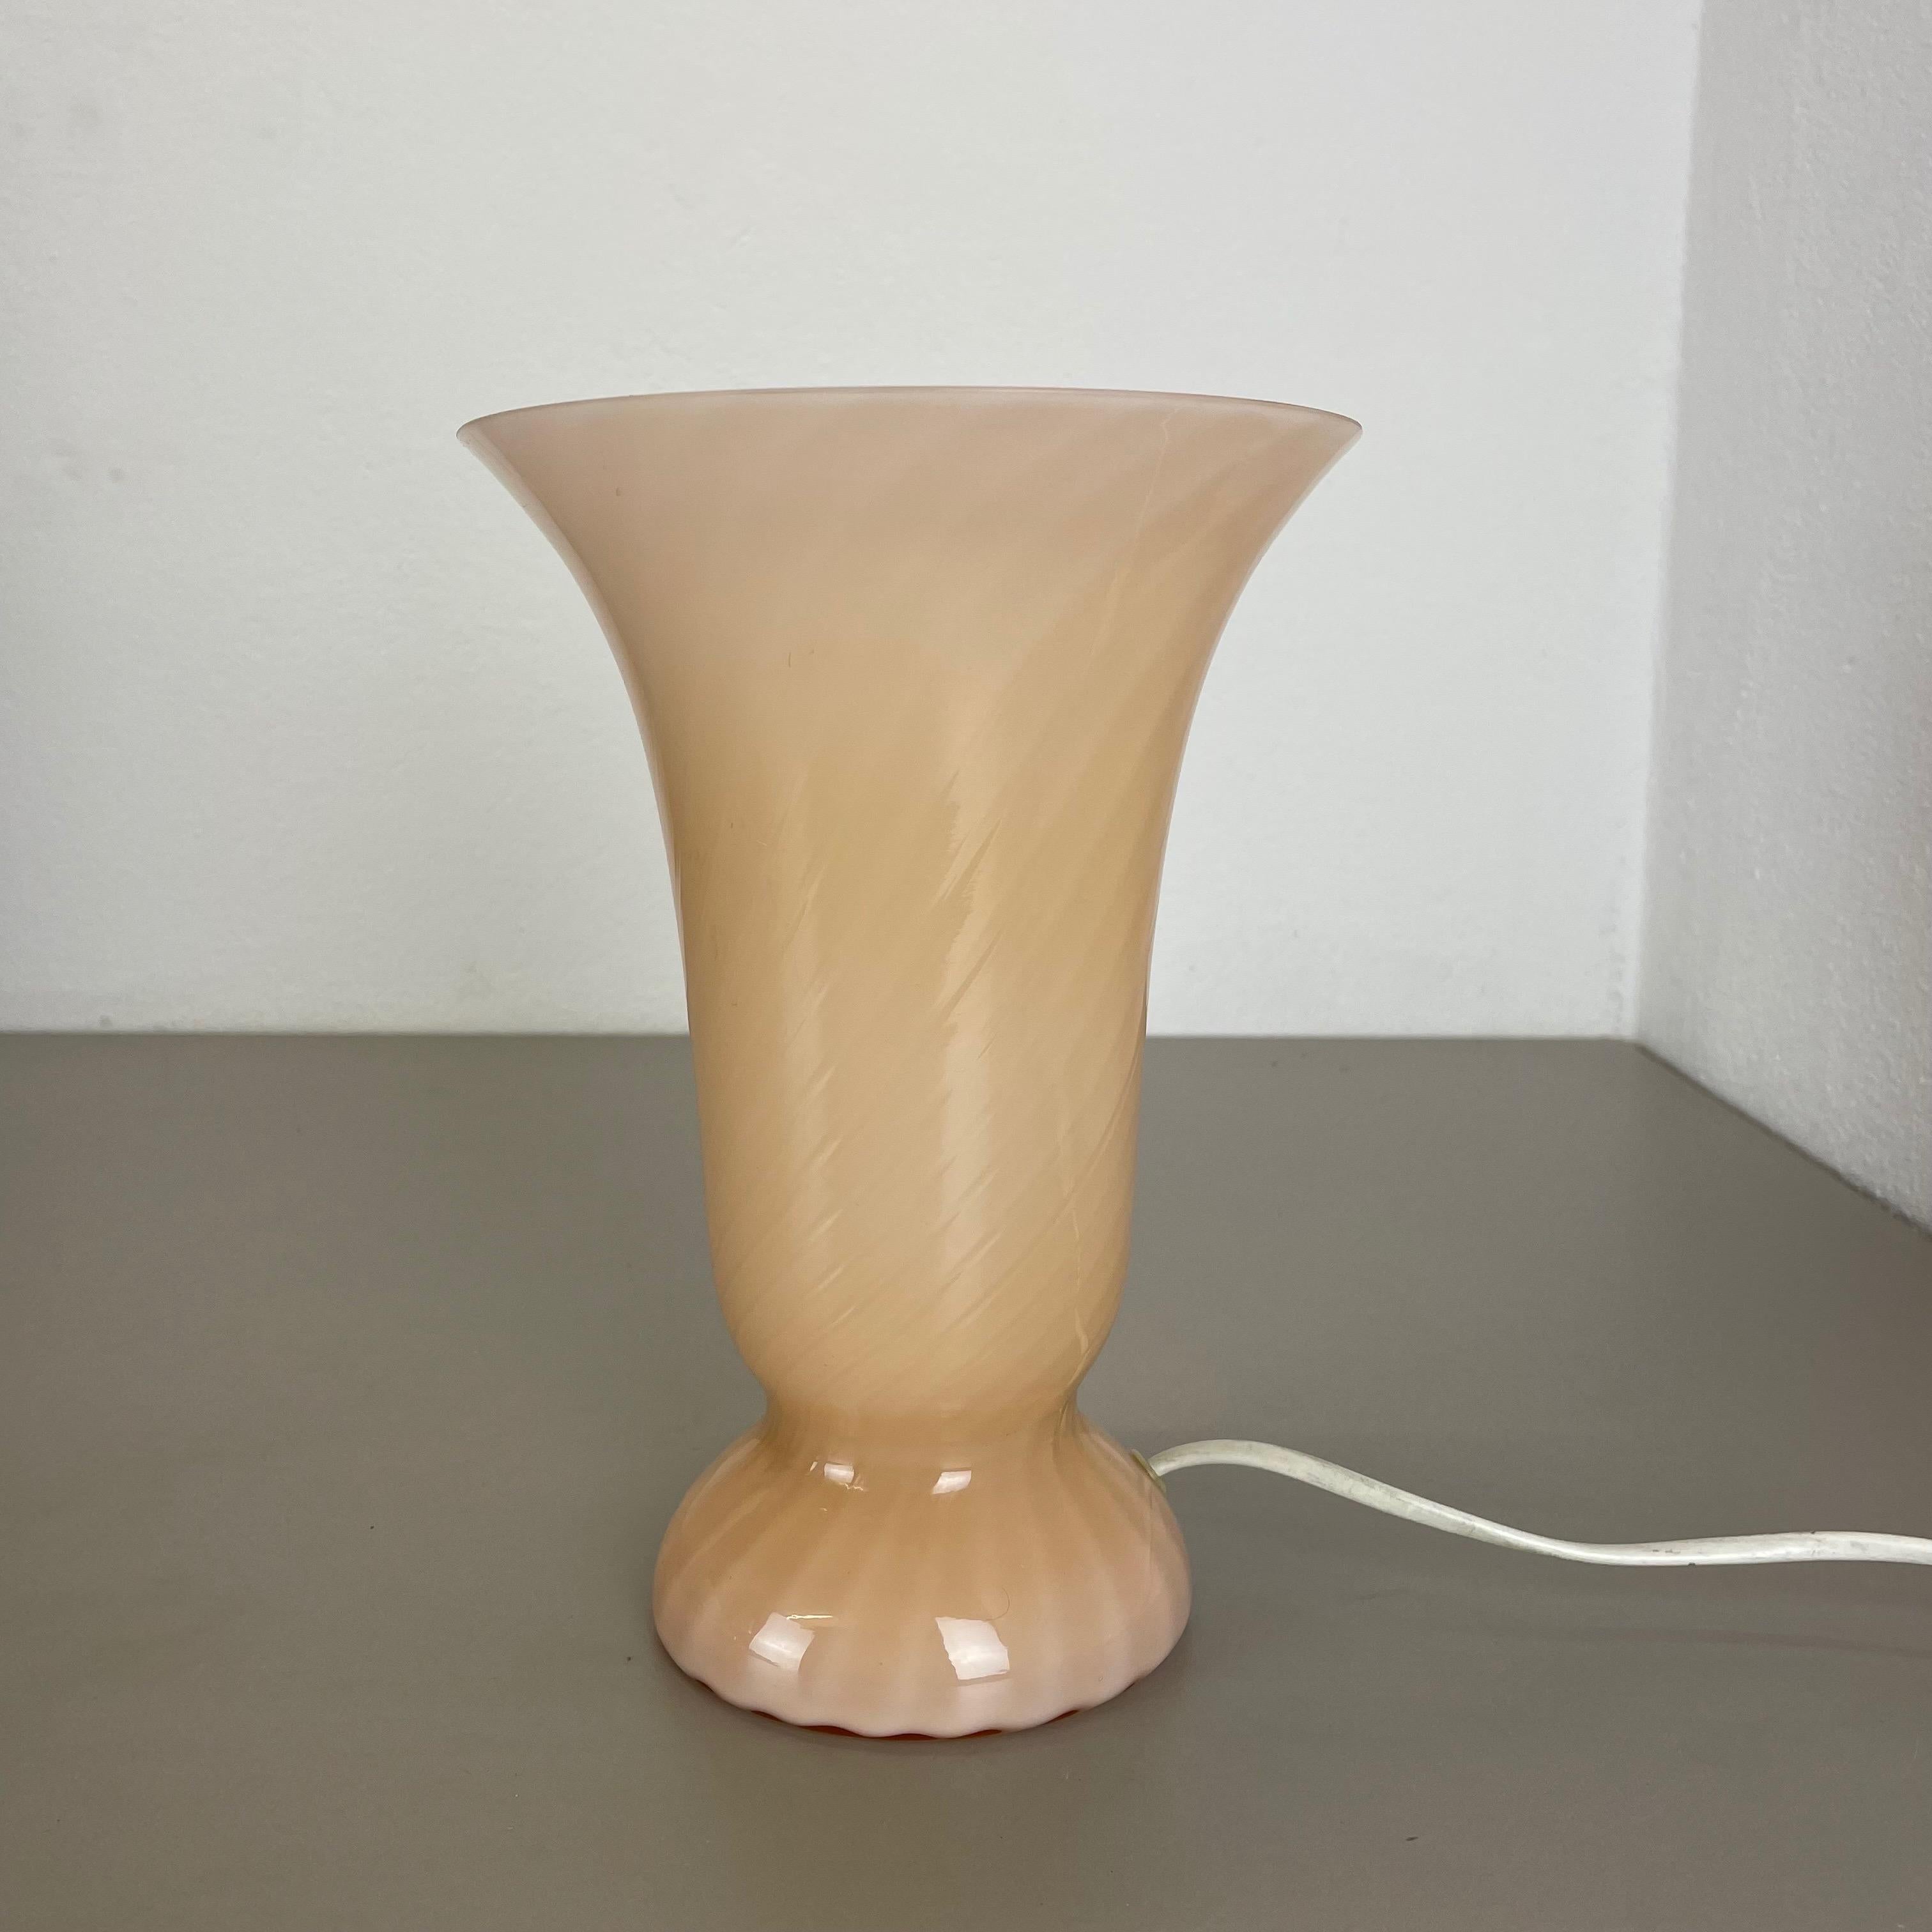 Article:

Table light desk top light


Producer:

Vetri Murano, Italy



Origin:

Italy



Age:

1970s



Description:

Original 1970s modernist Italian table light made of high quality Murano glass in floral form. The